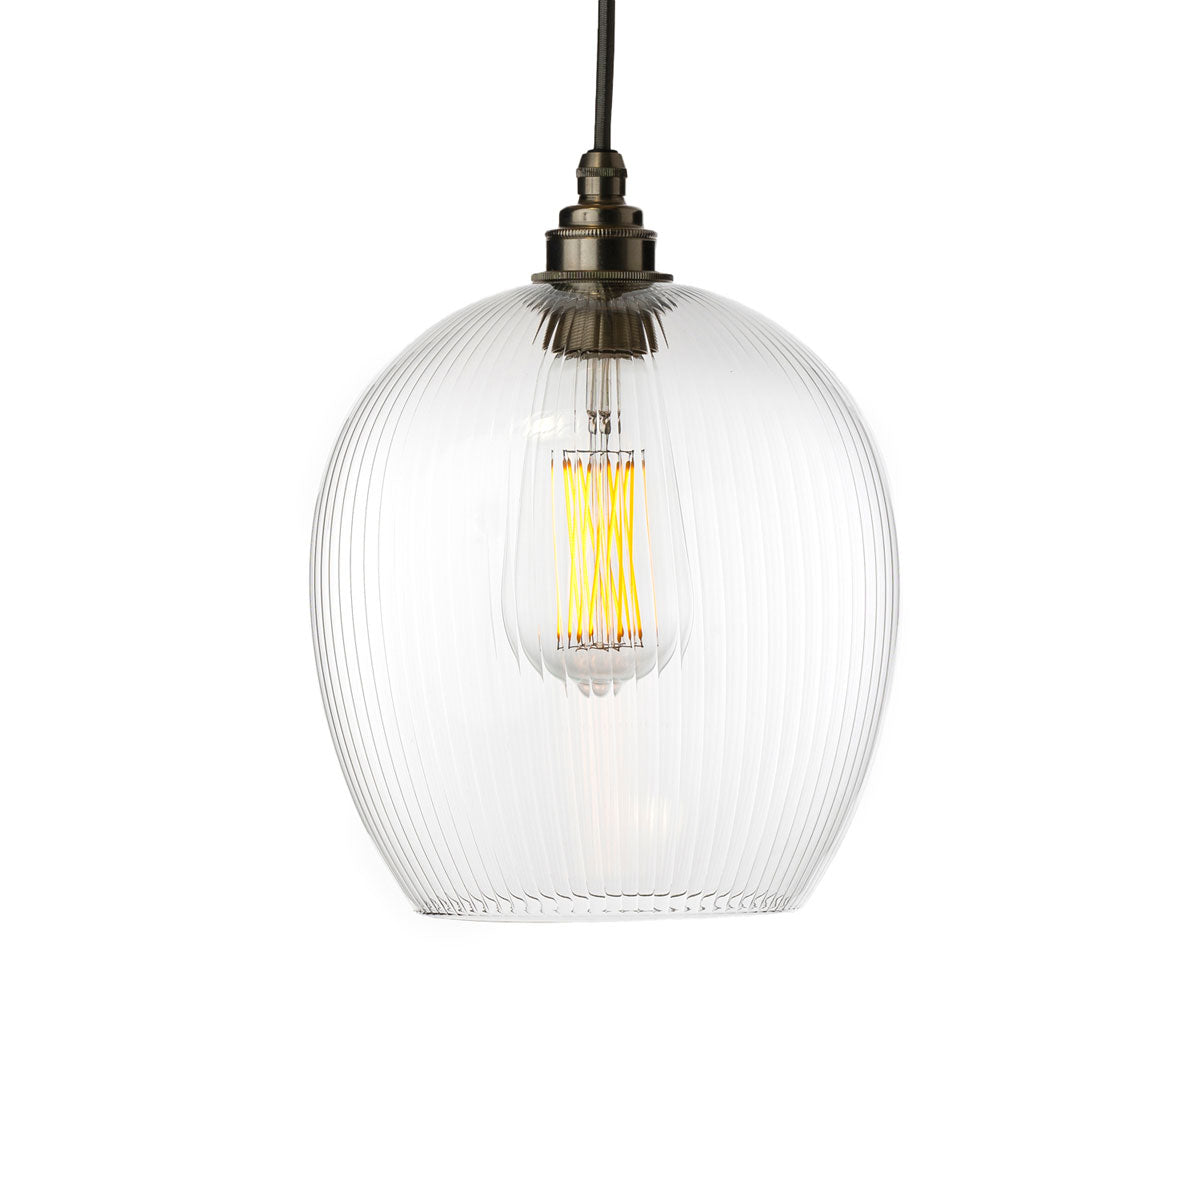 Fine ribbed Wimbledon style designer pendant lighting, made by Leverint and sold by South Charlotte Fine LIghting